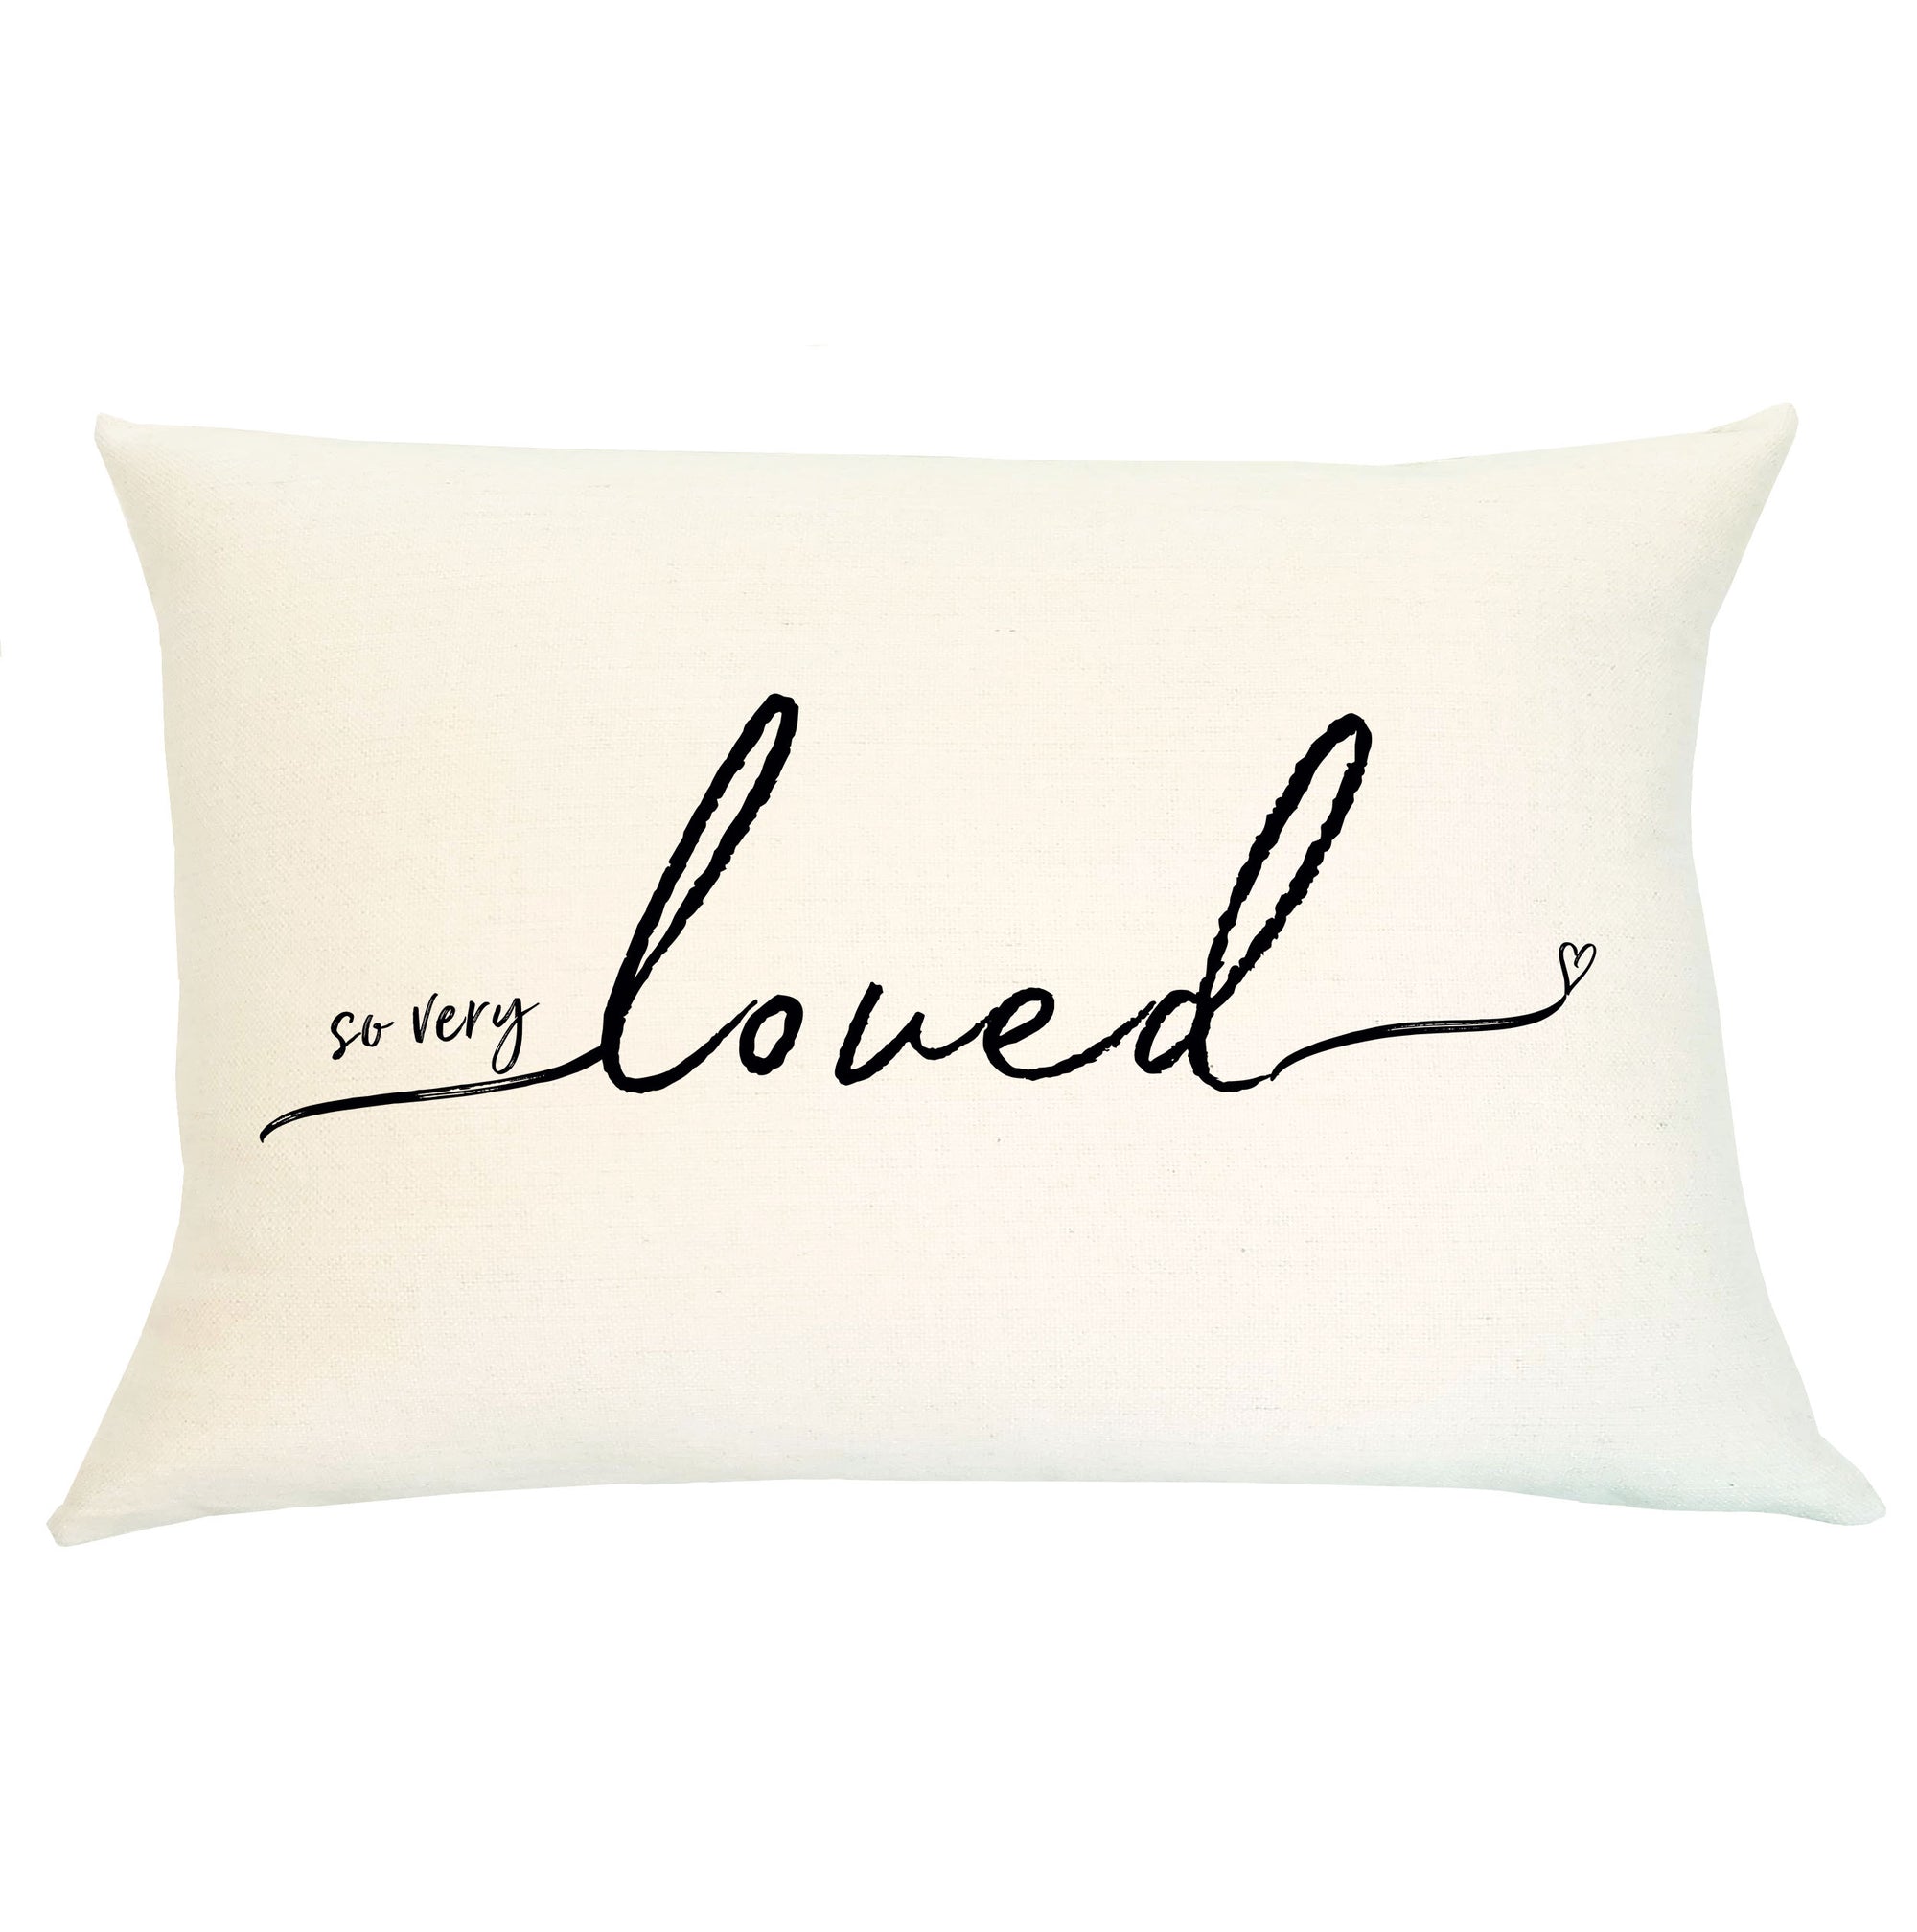 Pillow Lumbar - So Very Loved - Insert Included